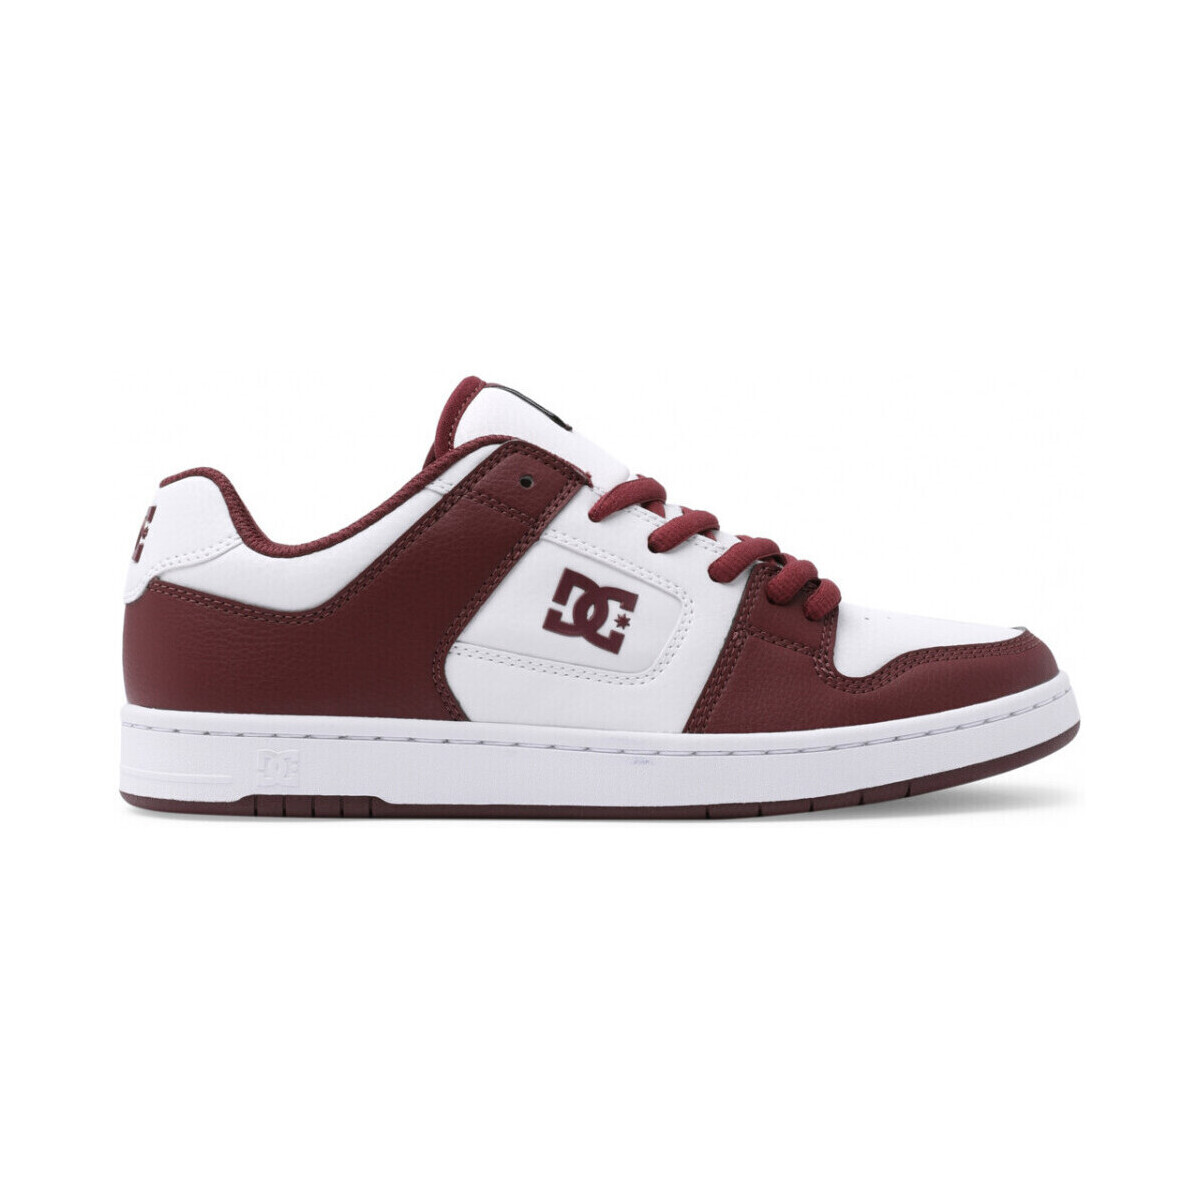 Chaussures Balance Furon Pro Soft Ground Boots Mens DC Shoes MANTECA 4 SN white aurora Rouge